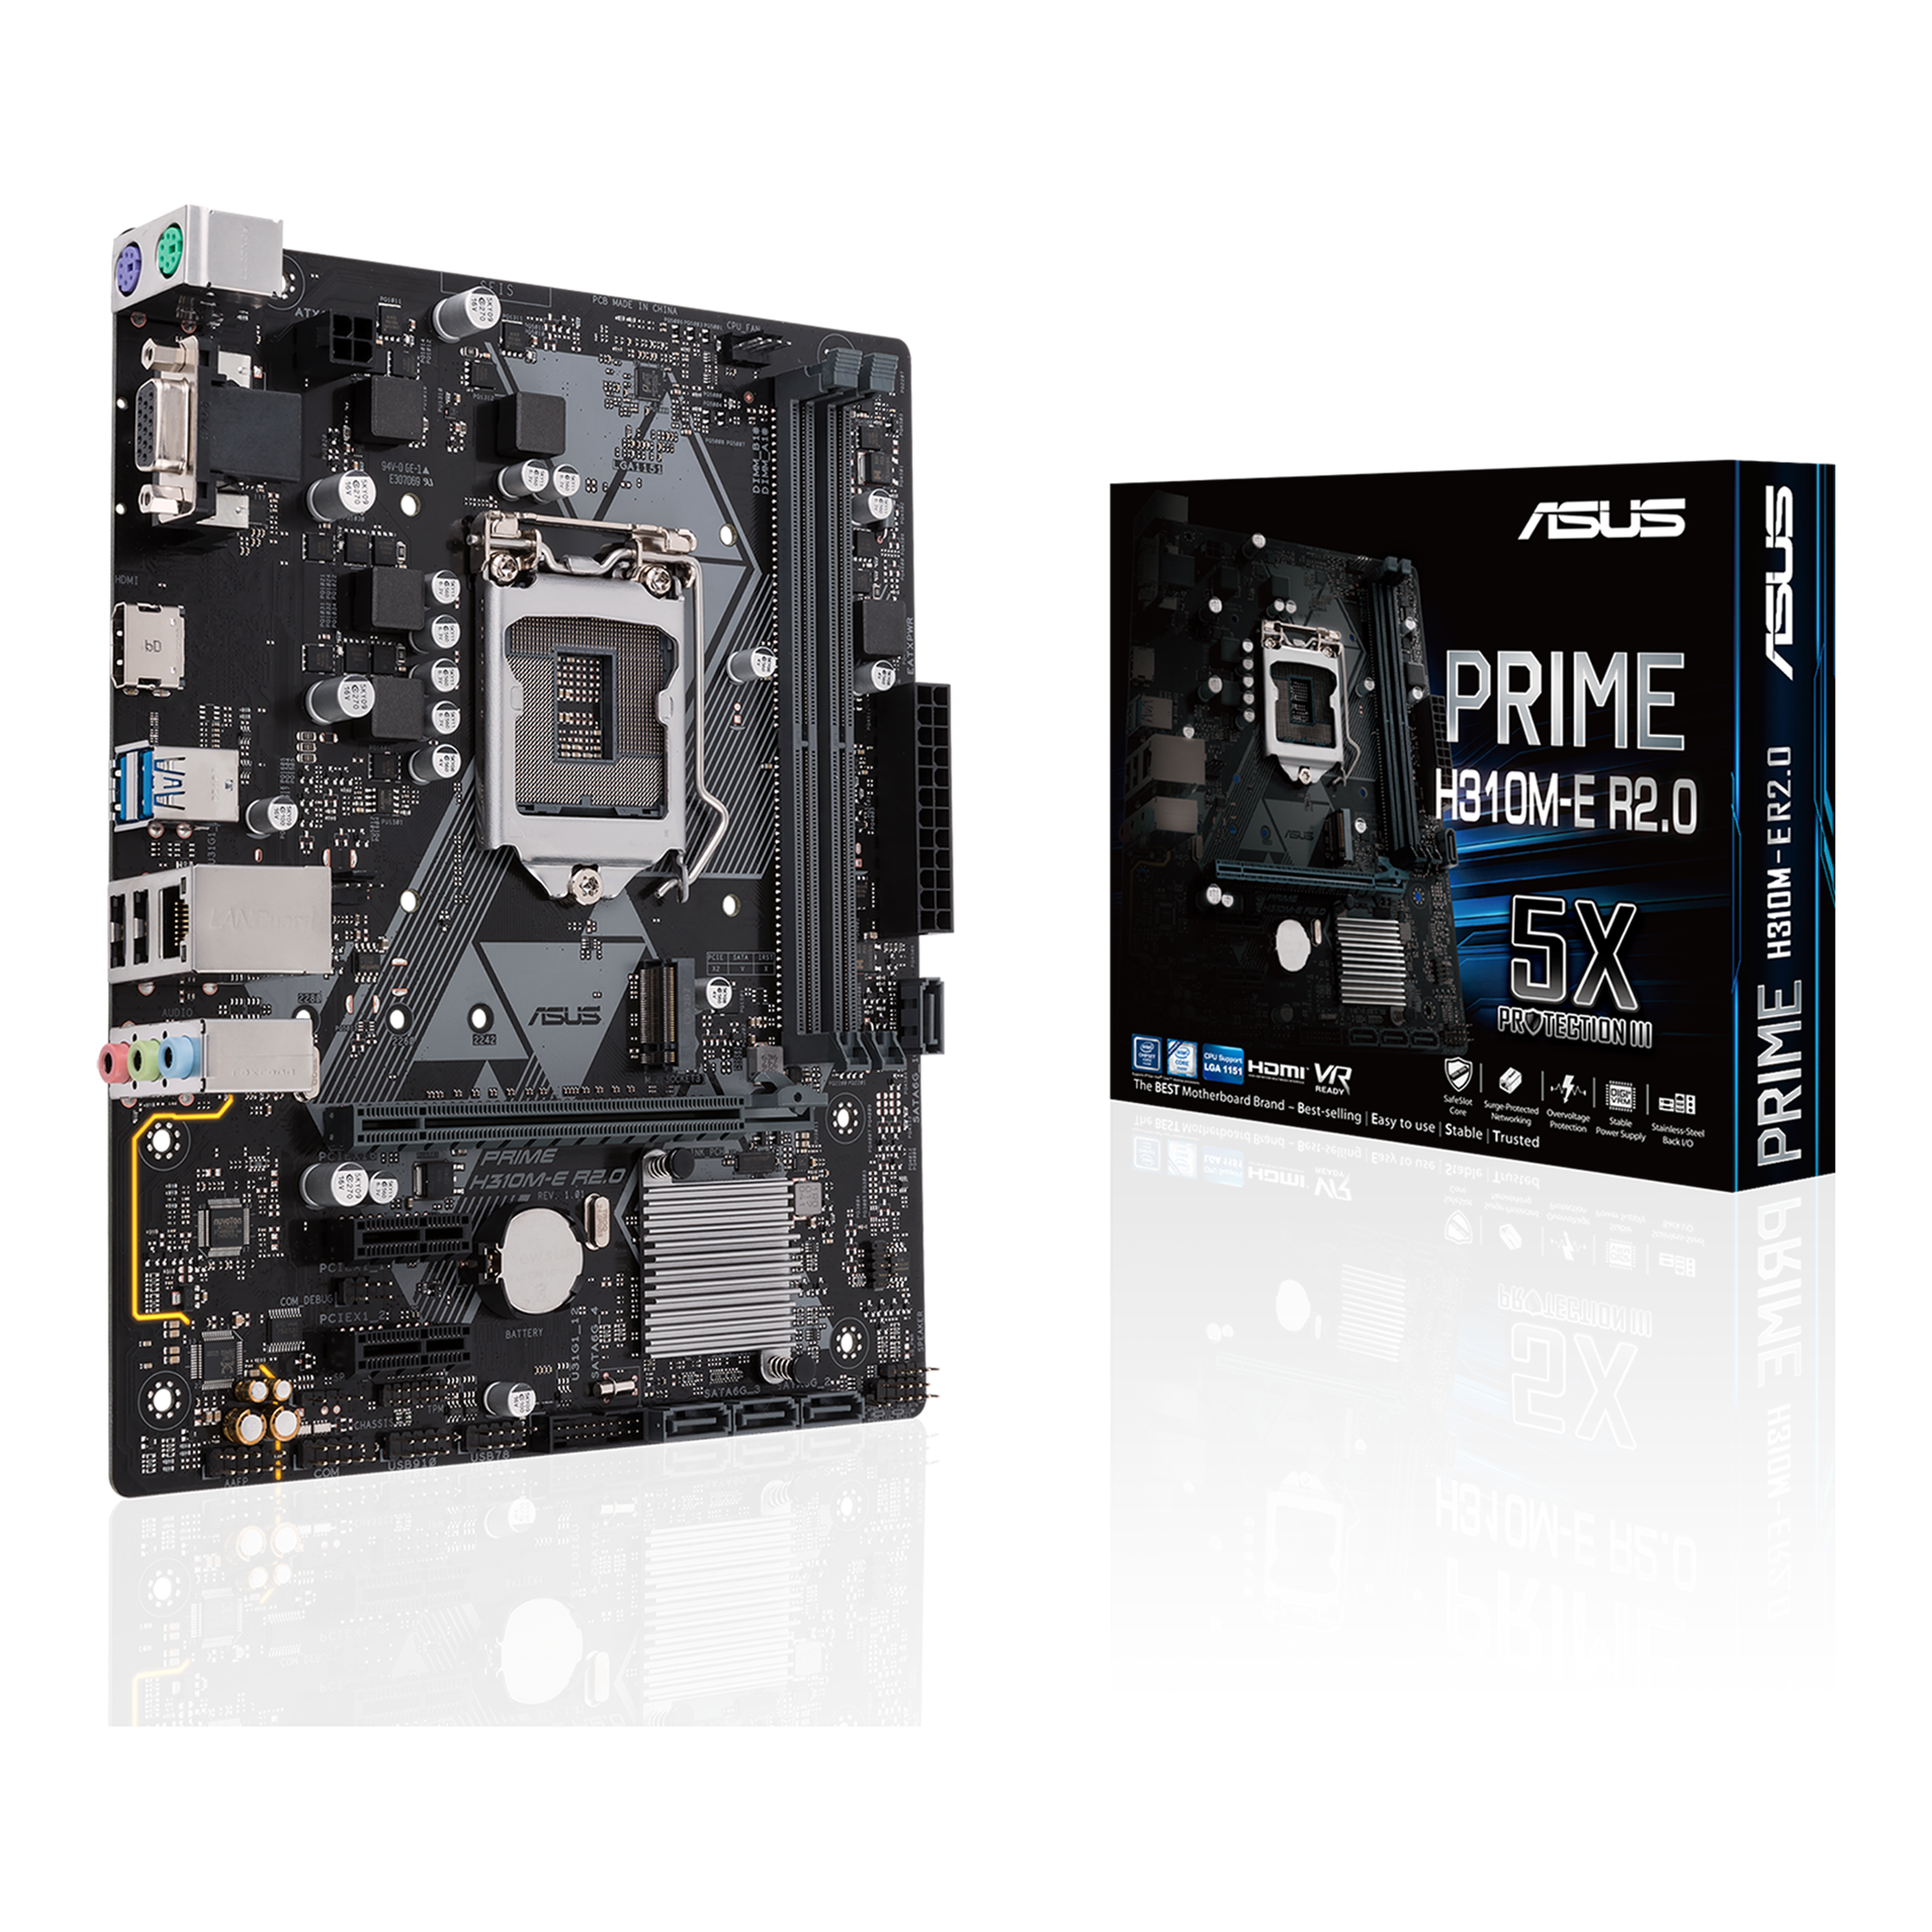 PRIME H310M-E R2.0｜Motherboards｜ASUS Indonesia